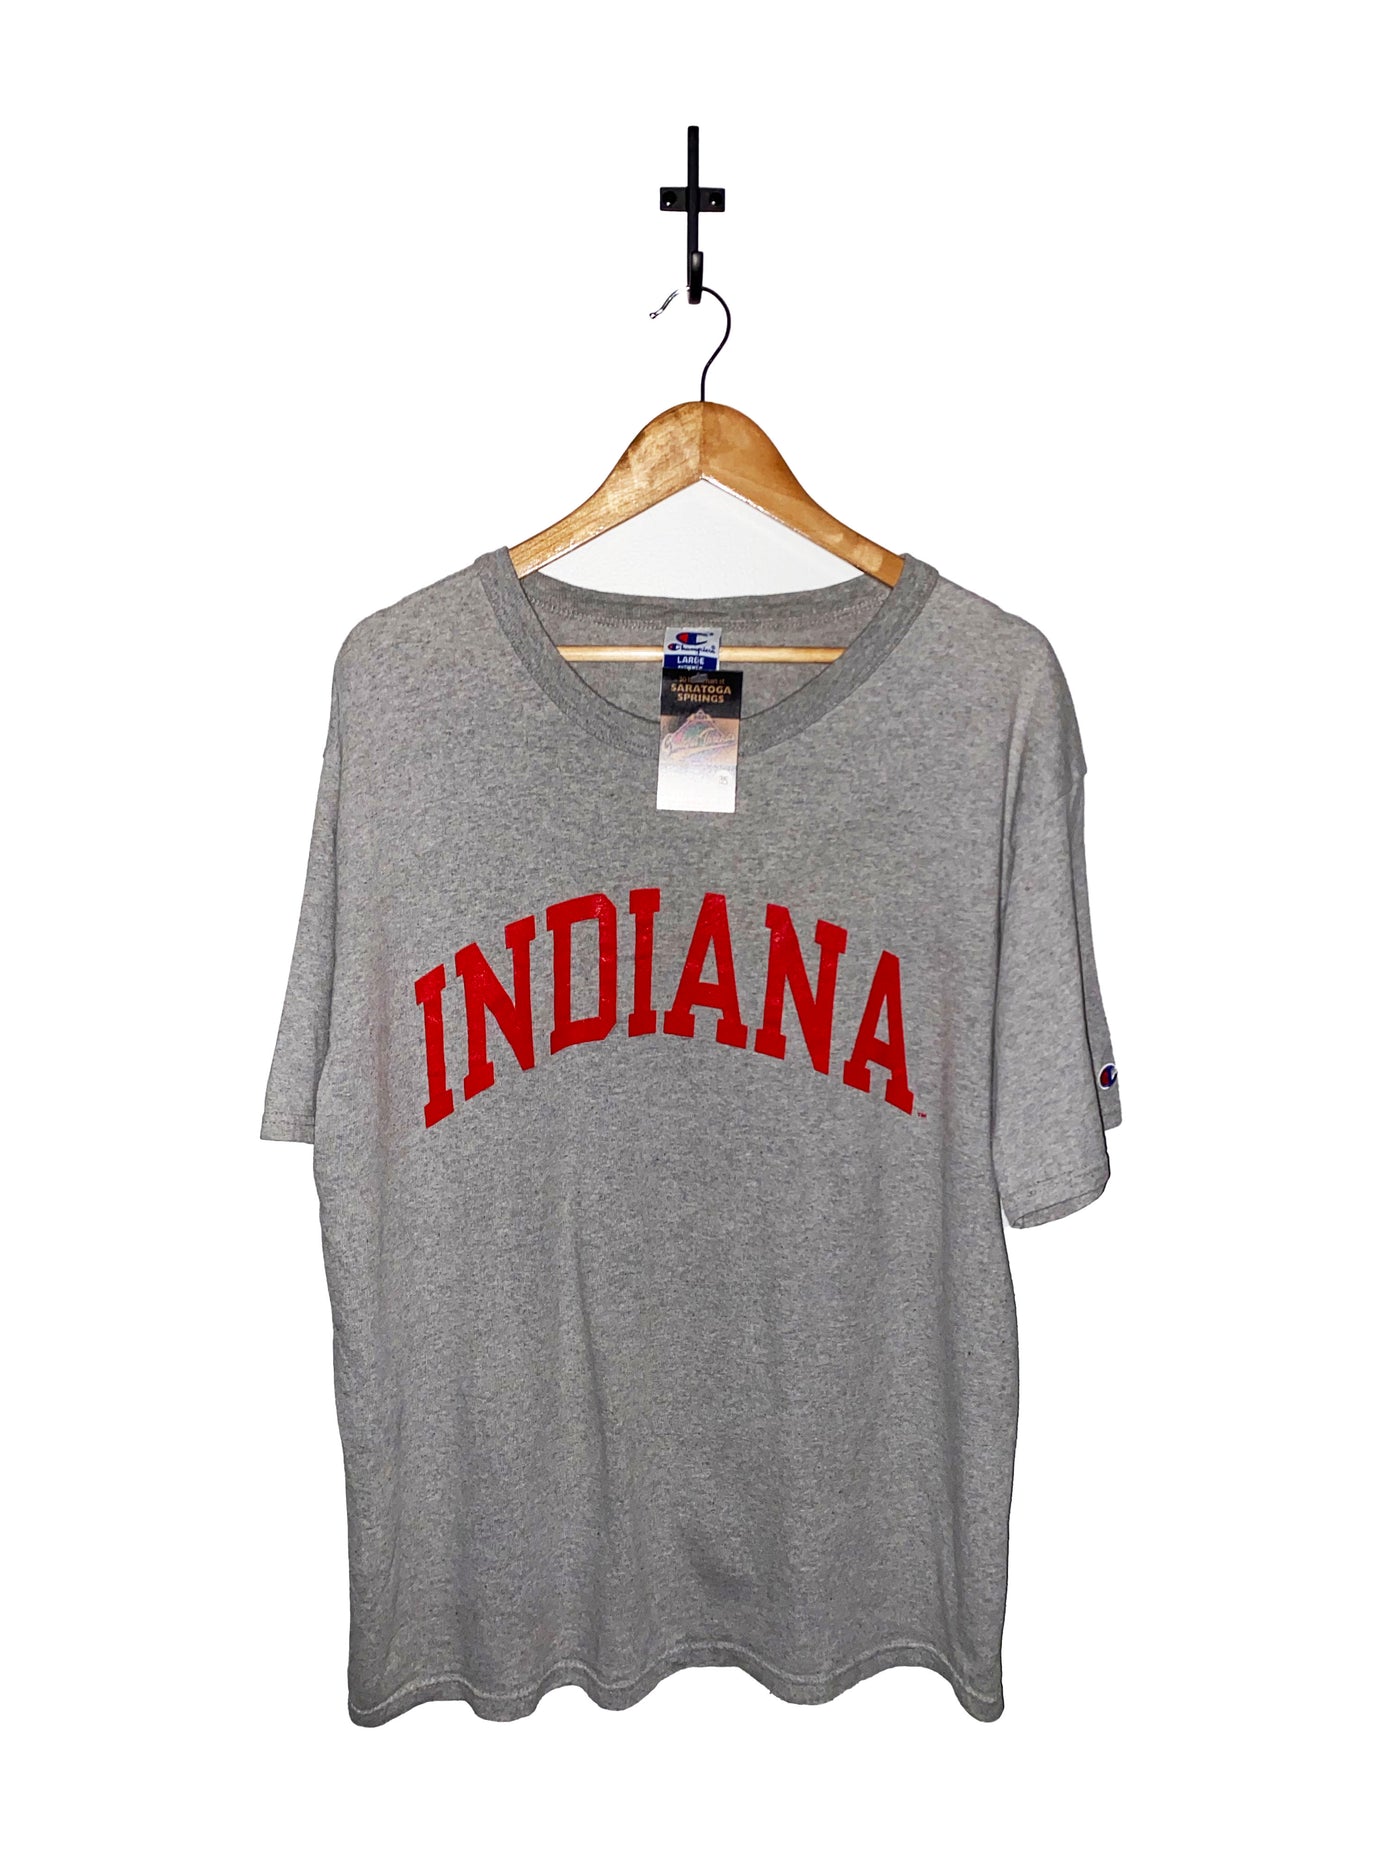 Vintage Champion Indiana Spellout T-Shirt